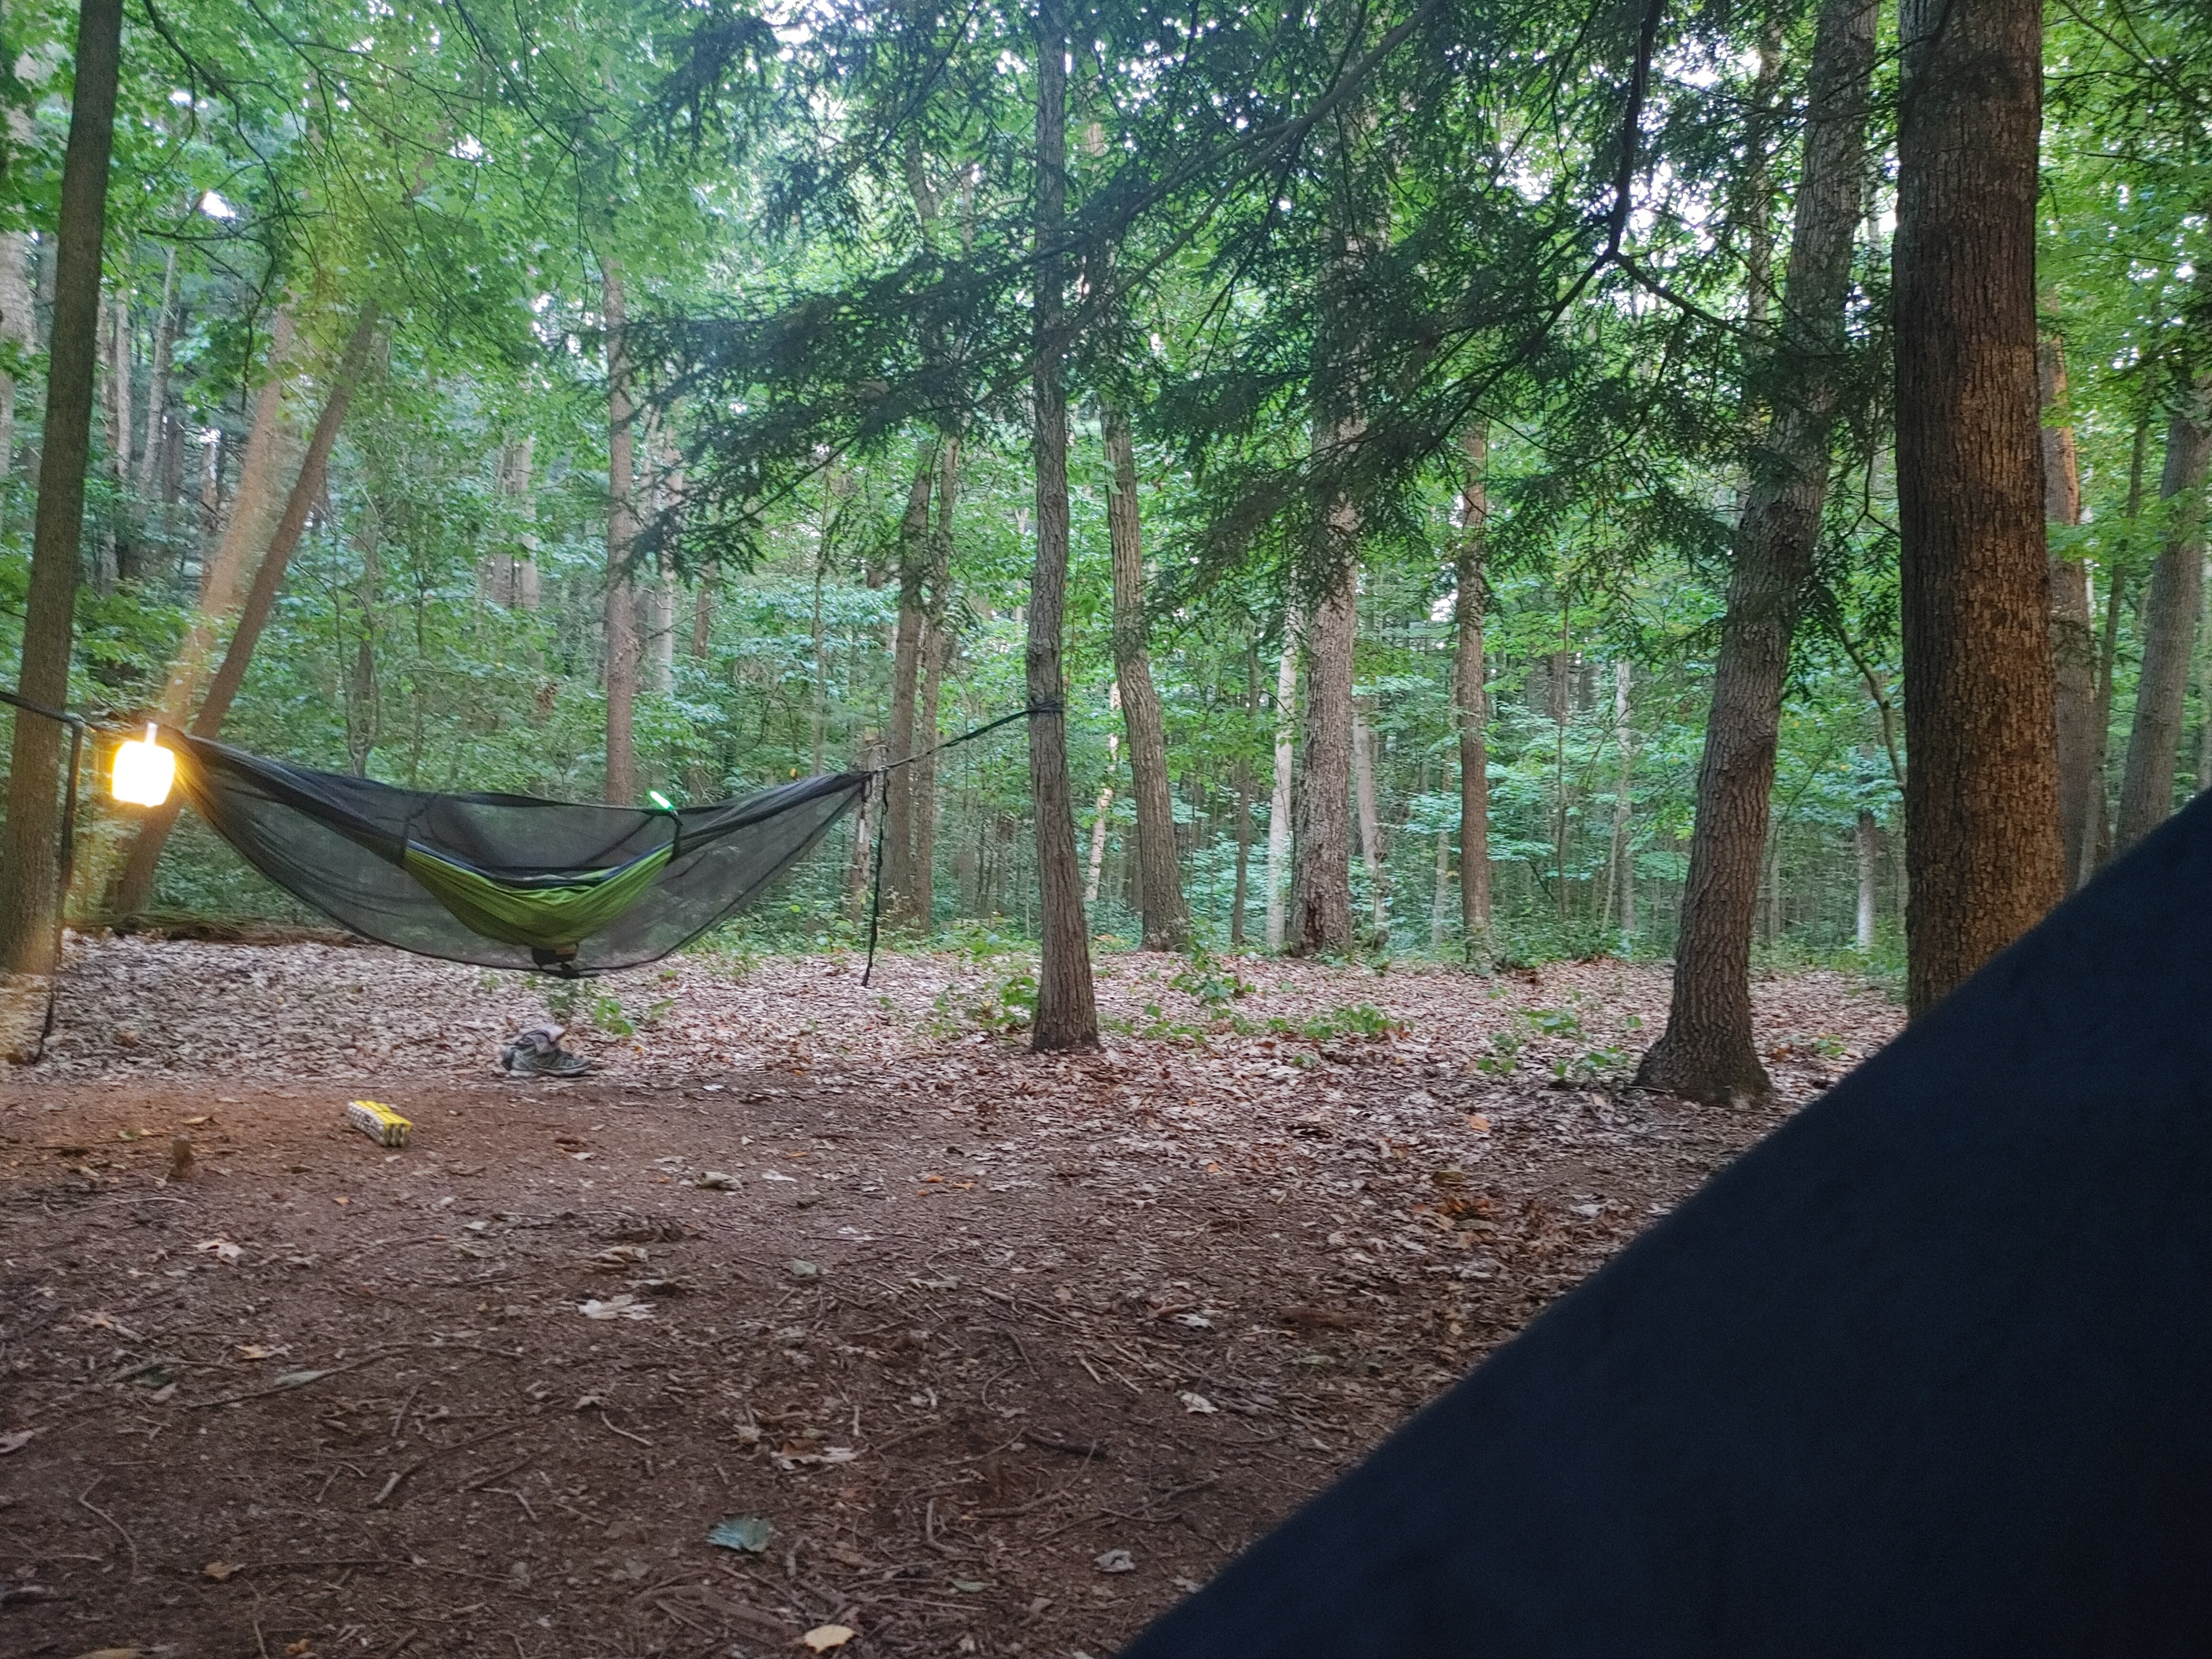 Awesome trees to hammock in and no need to set up a tent at this site.